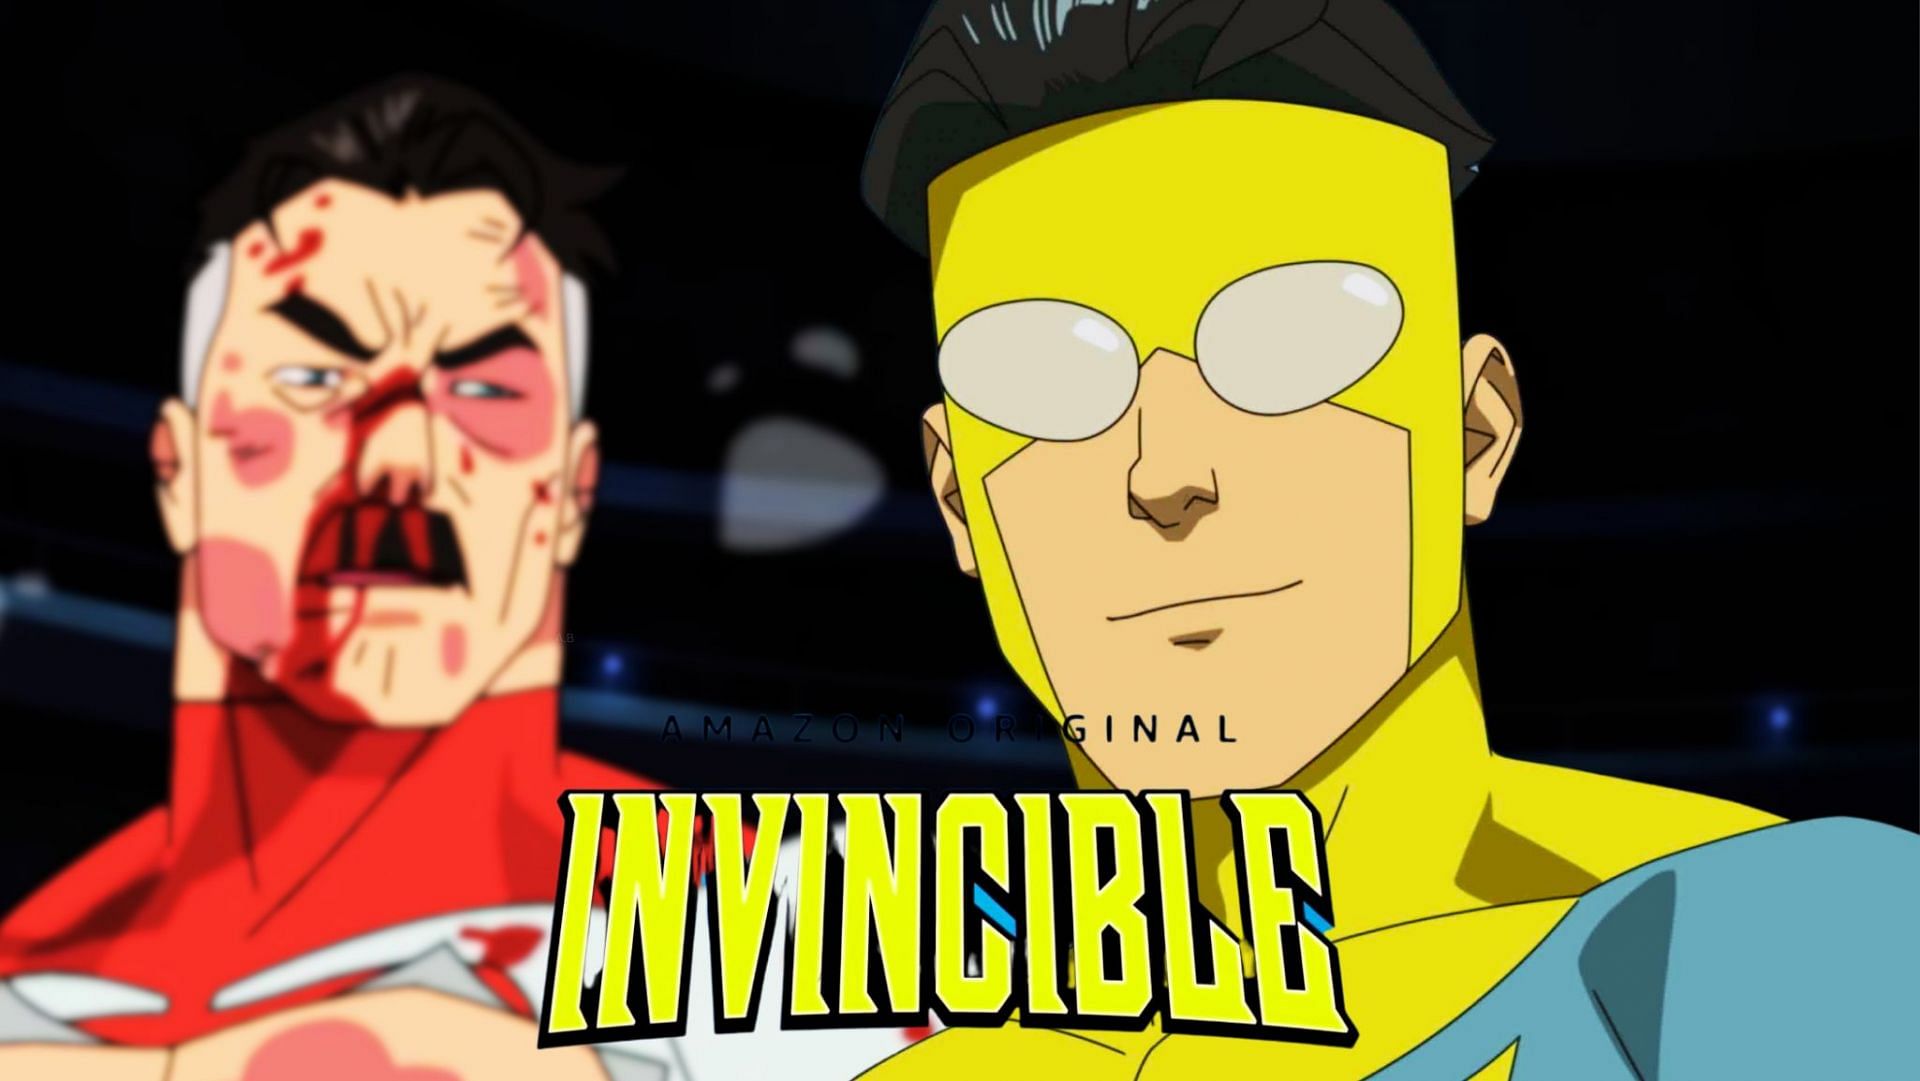 Invincible' Season 2: Everything We Know So Far